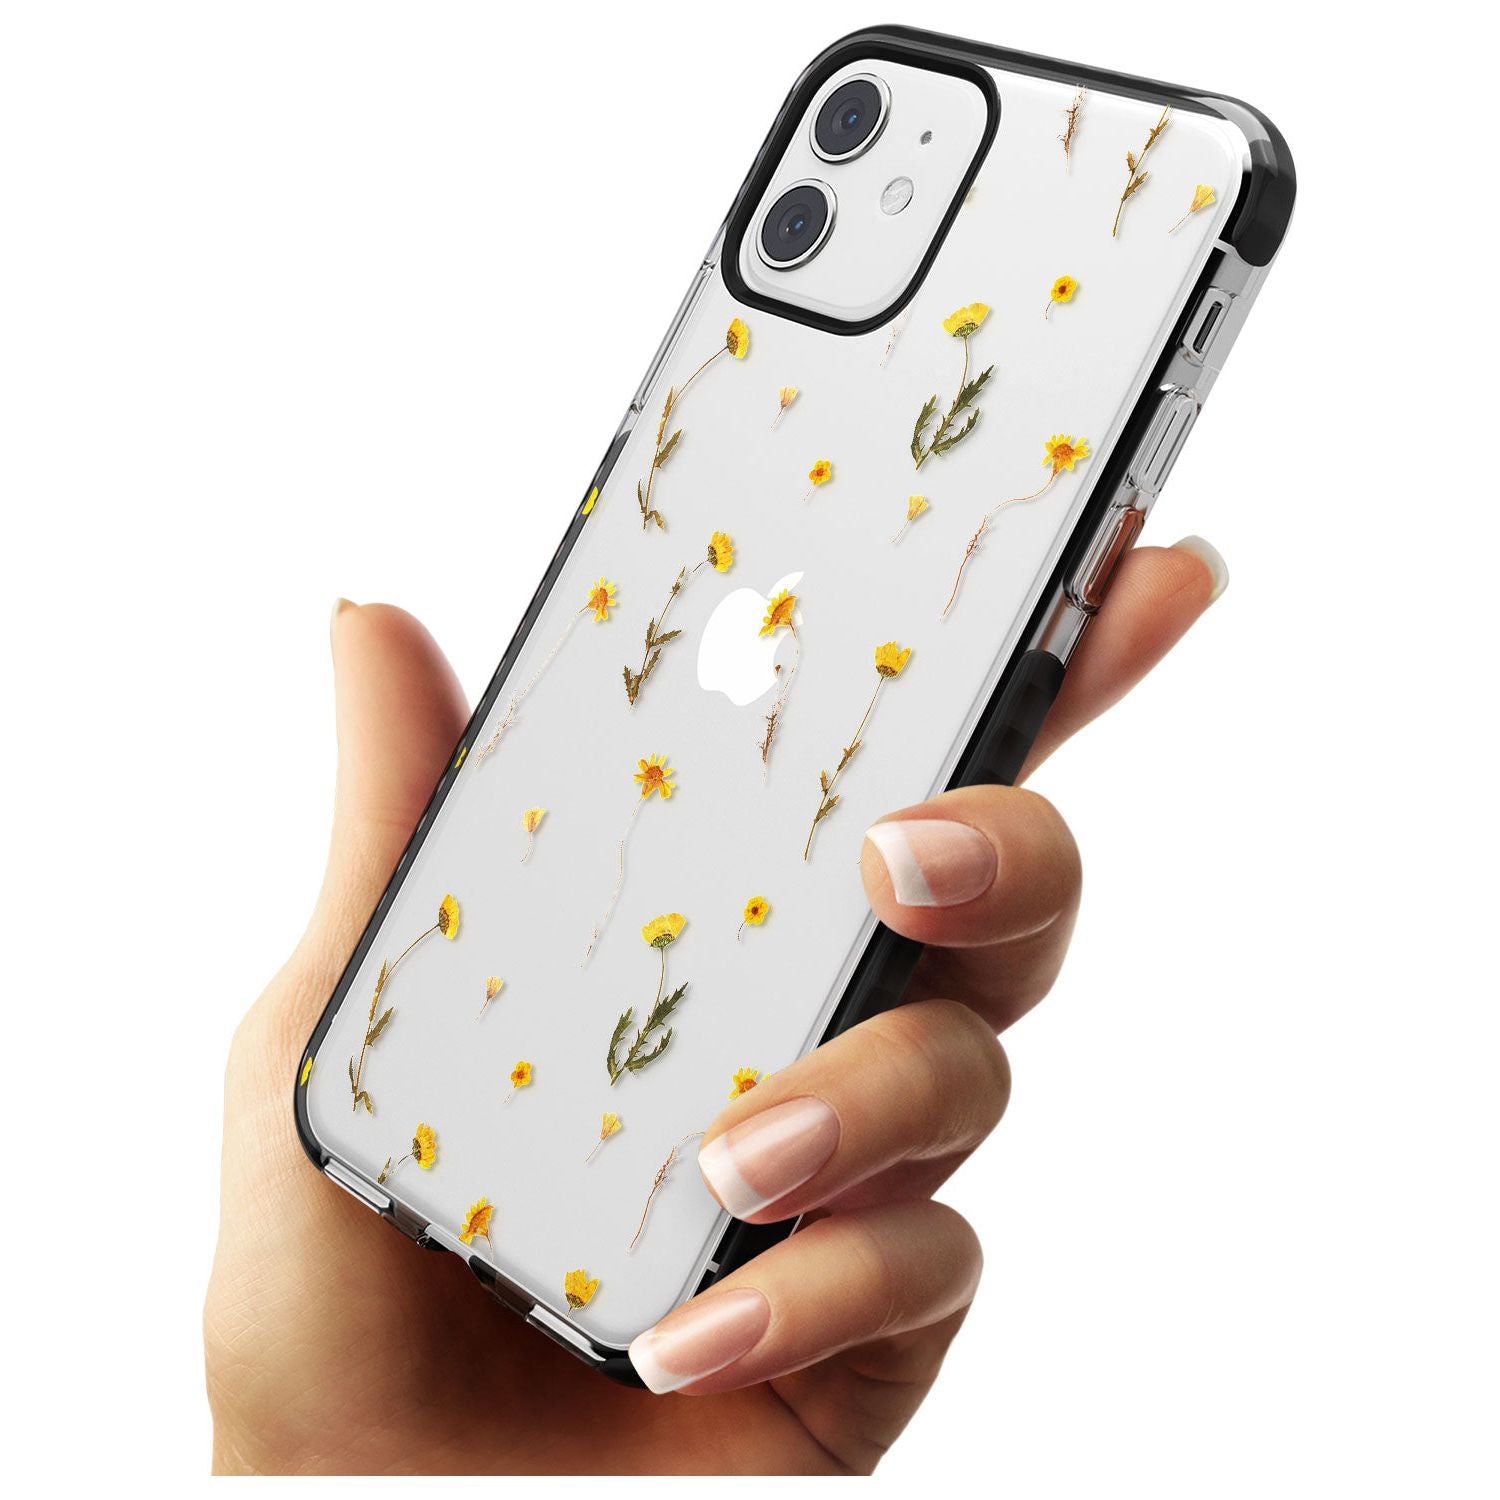 Mixed Yellow Flowers - Dried Flower-Inspired Black Impact Phone Case for iPhone 11